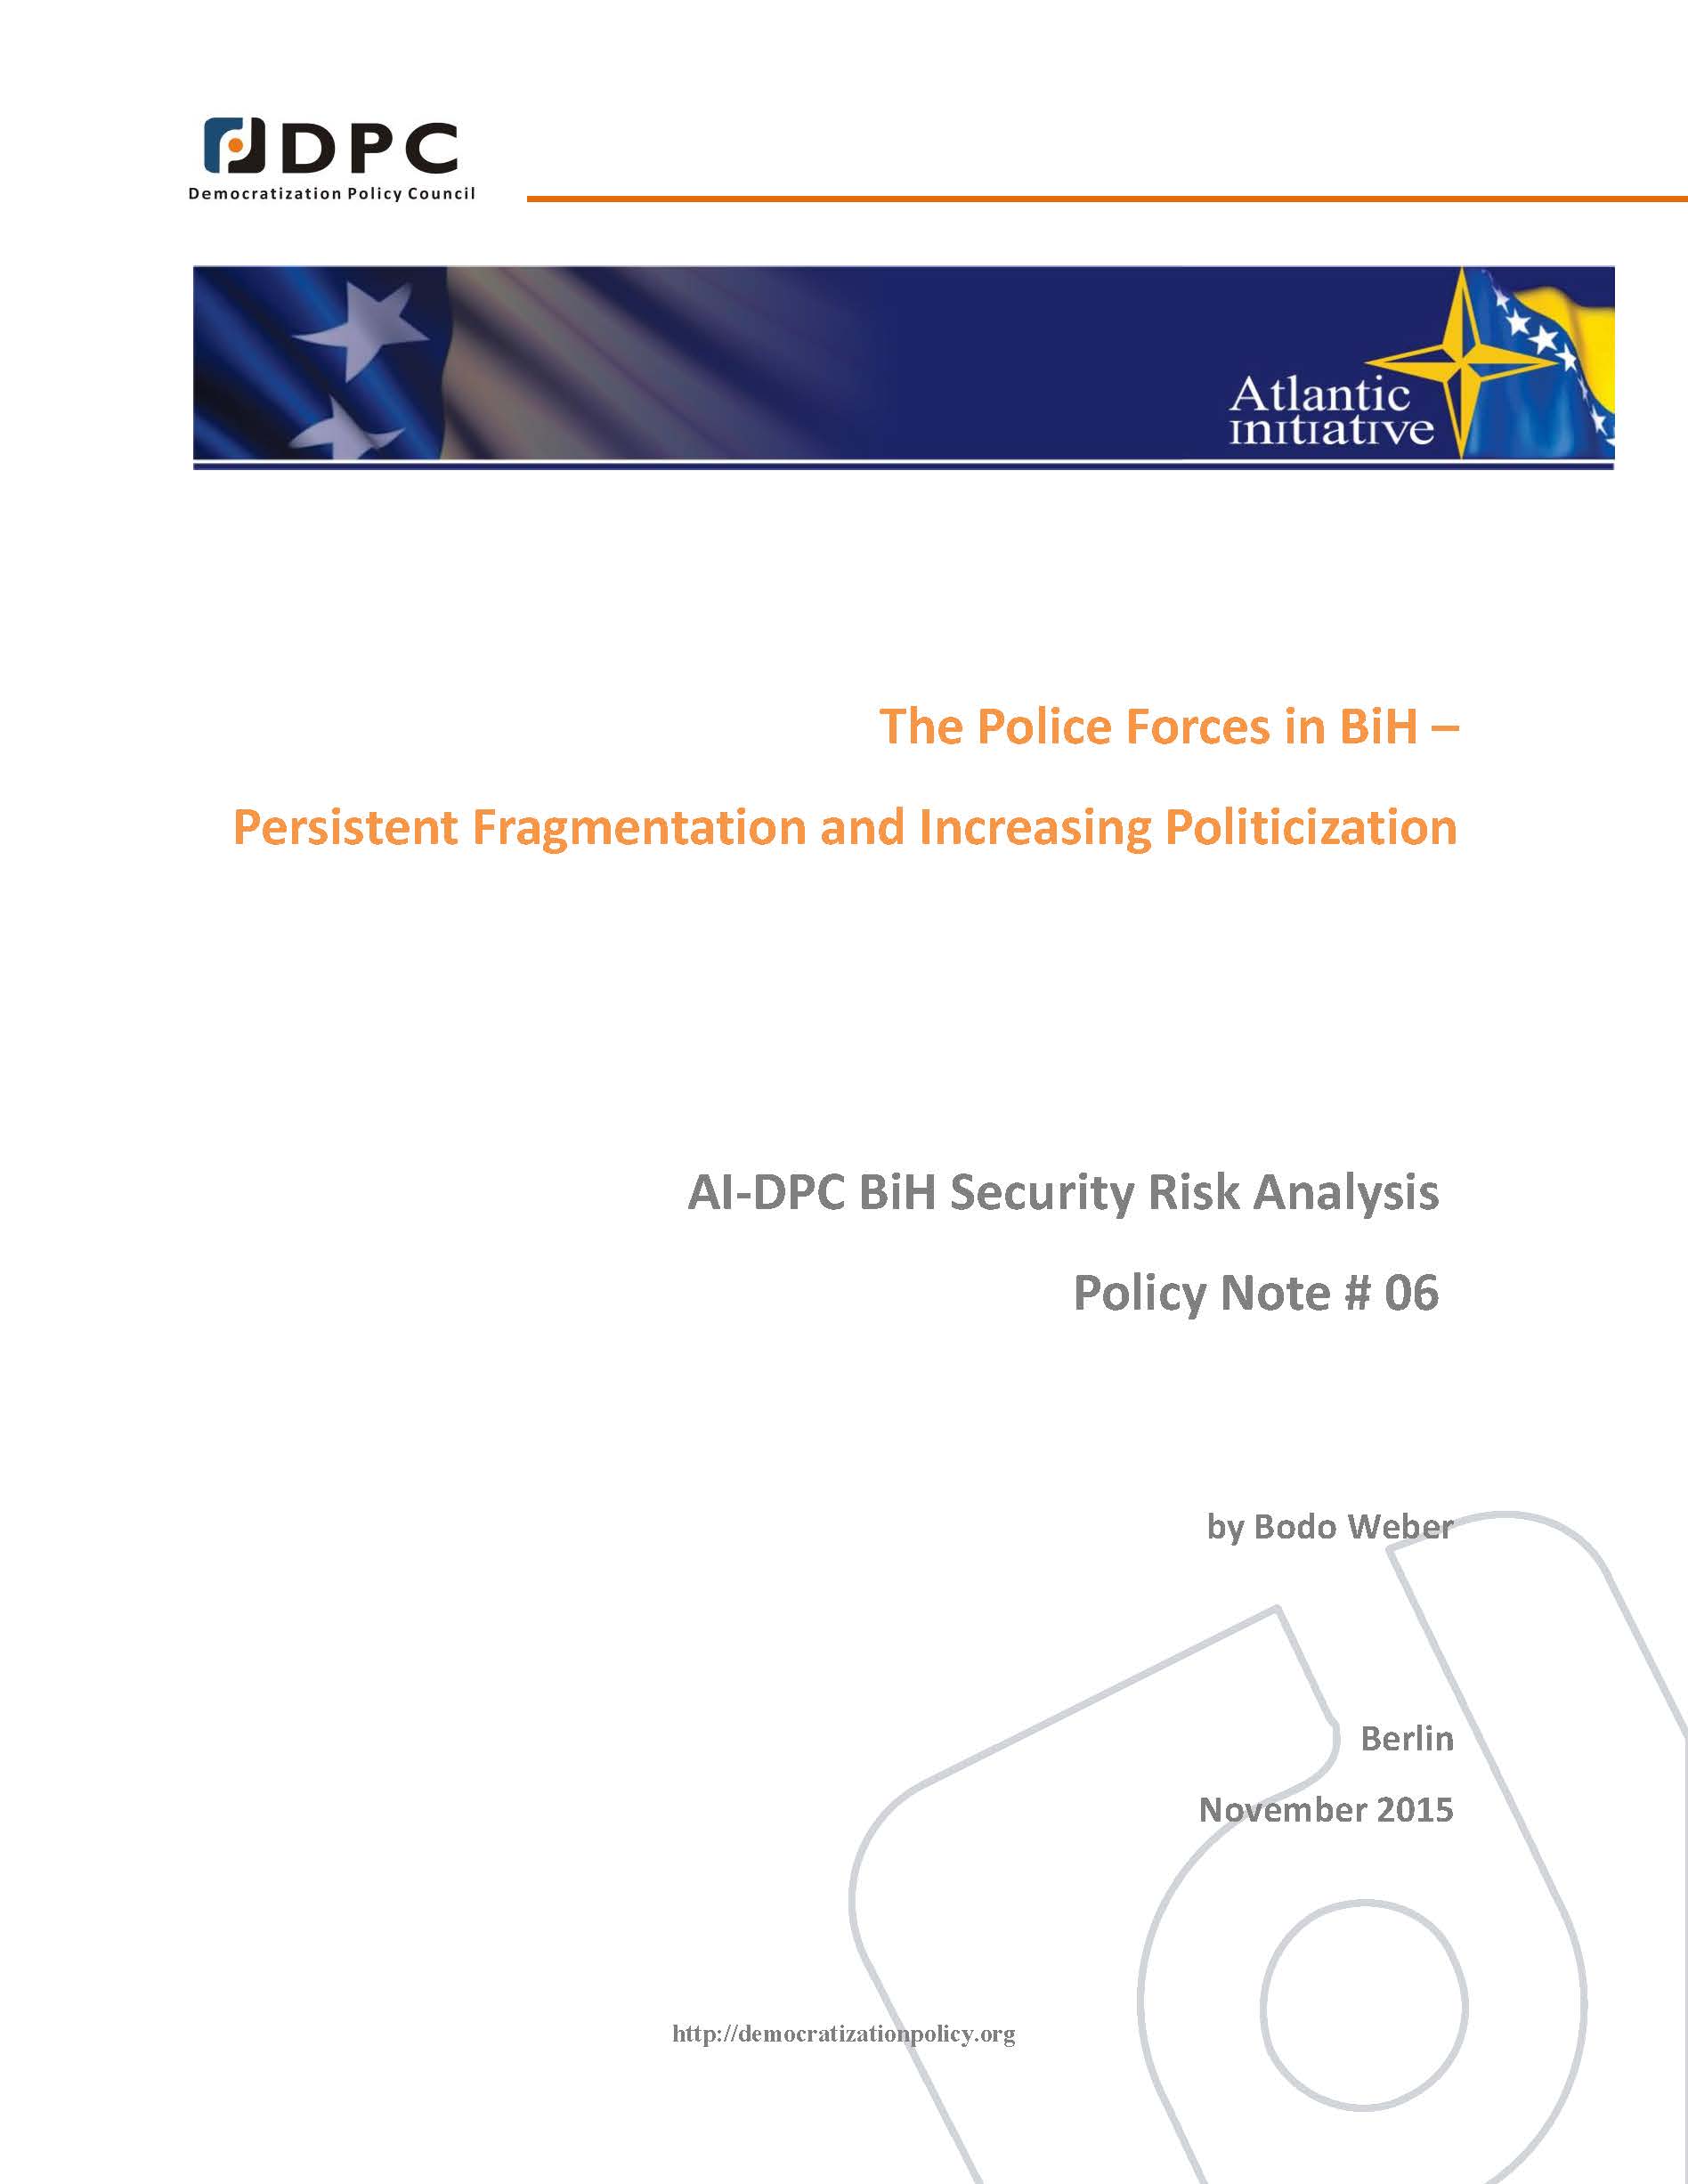 AI-DPC BiH SECURITY ANALYSIS POLICY NOTE 06: The Police Forces in BiH – Persistent Fragmentation and Increasing Politicization.